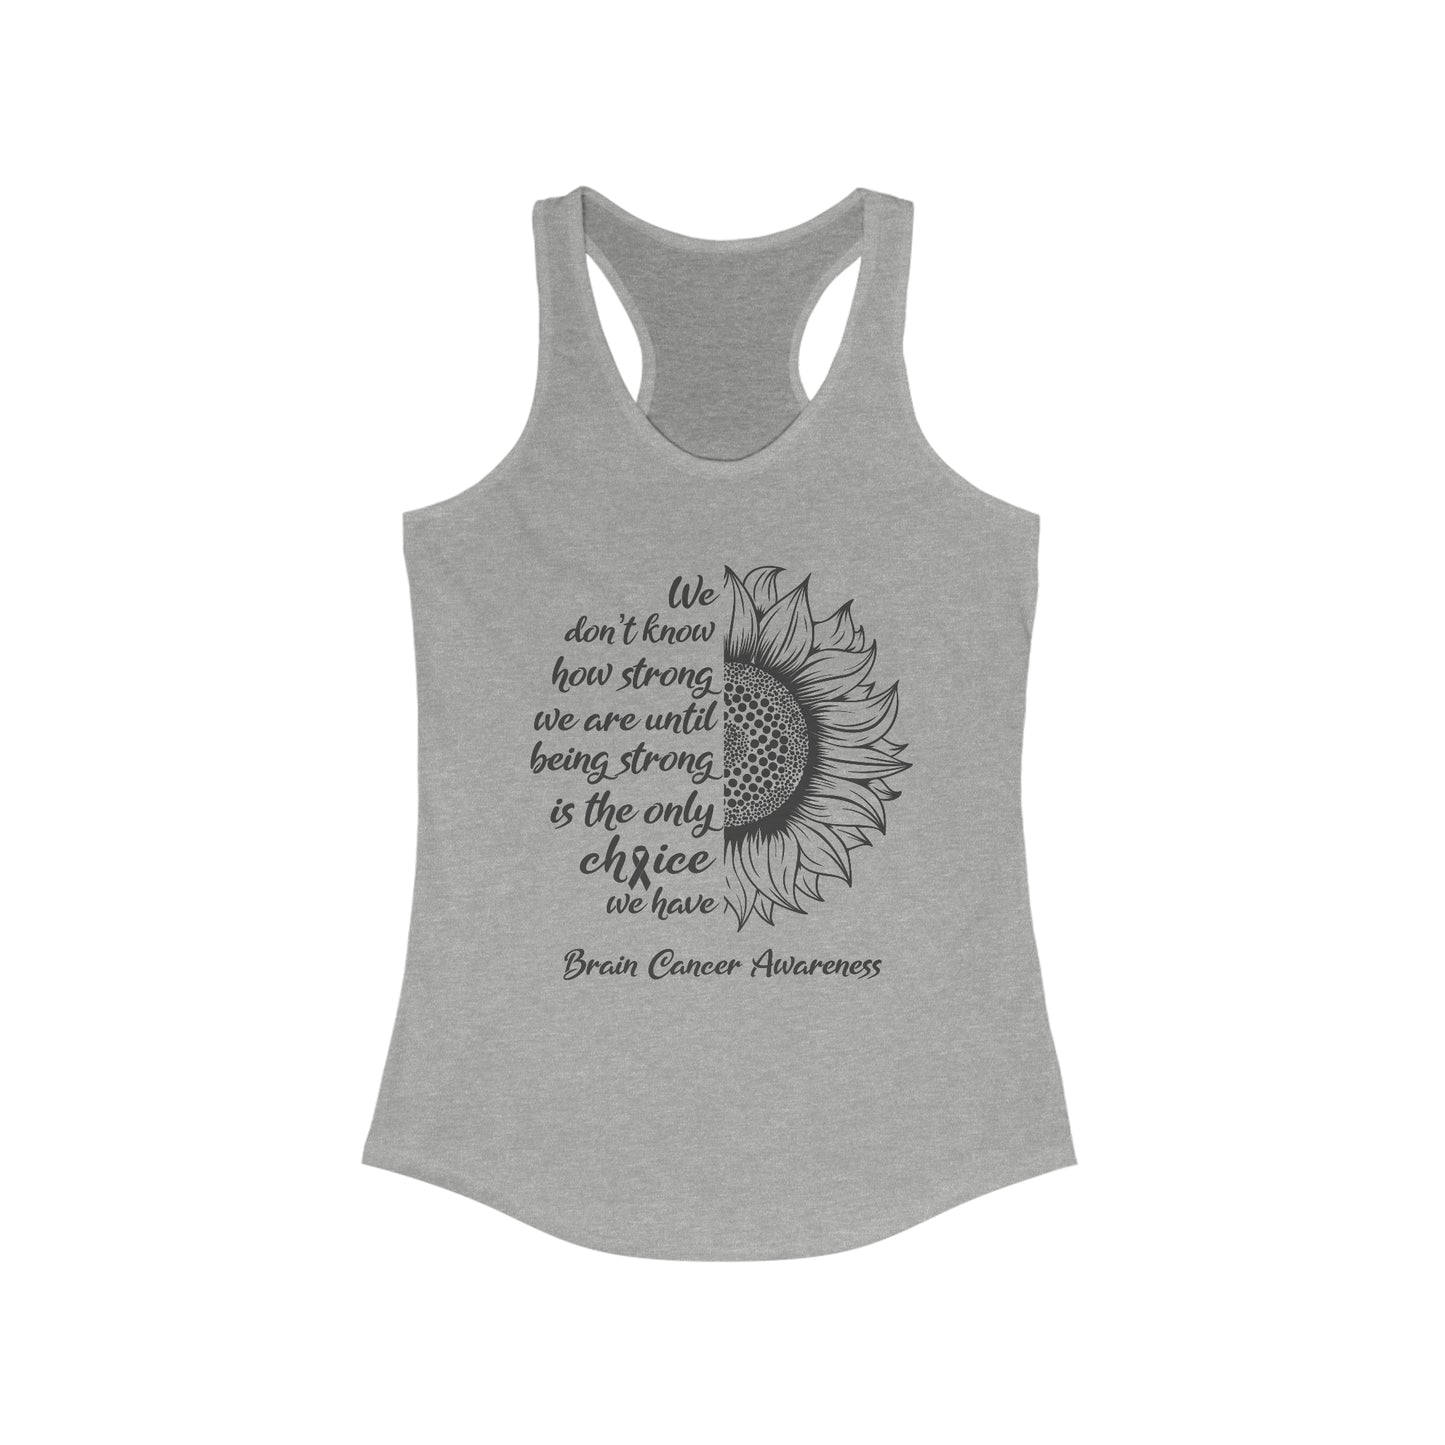 Brain Cancer Awareness Tank Top For Fight Brain Cancer With Sunflower Message